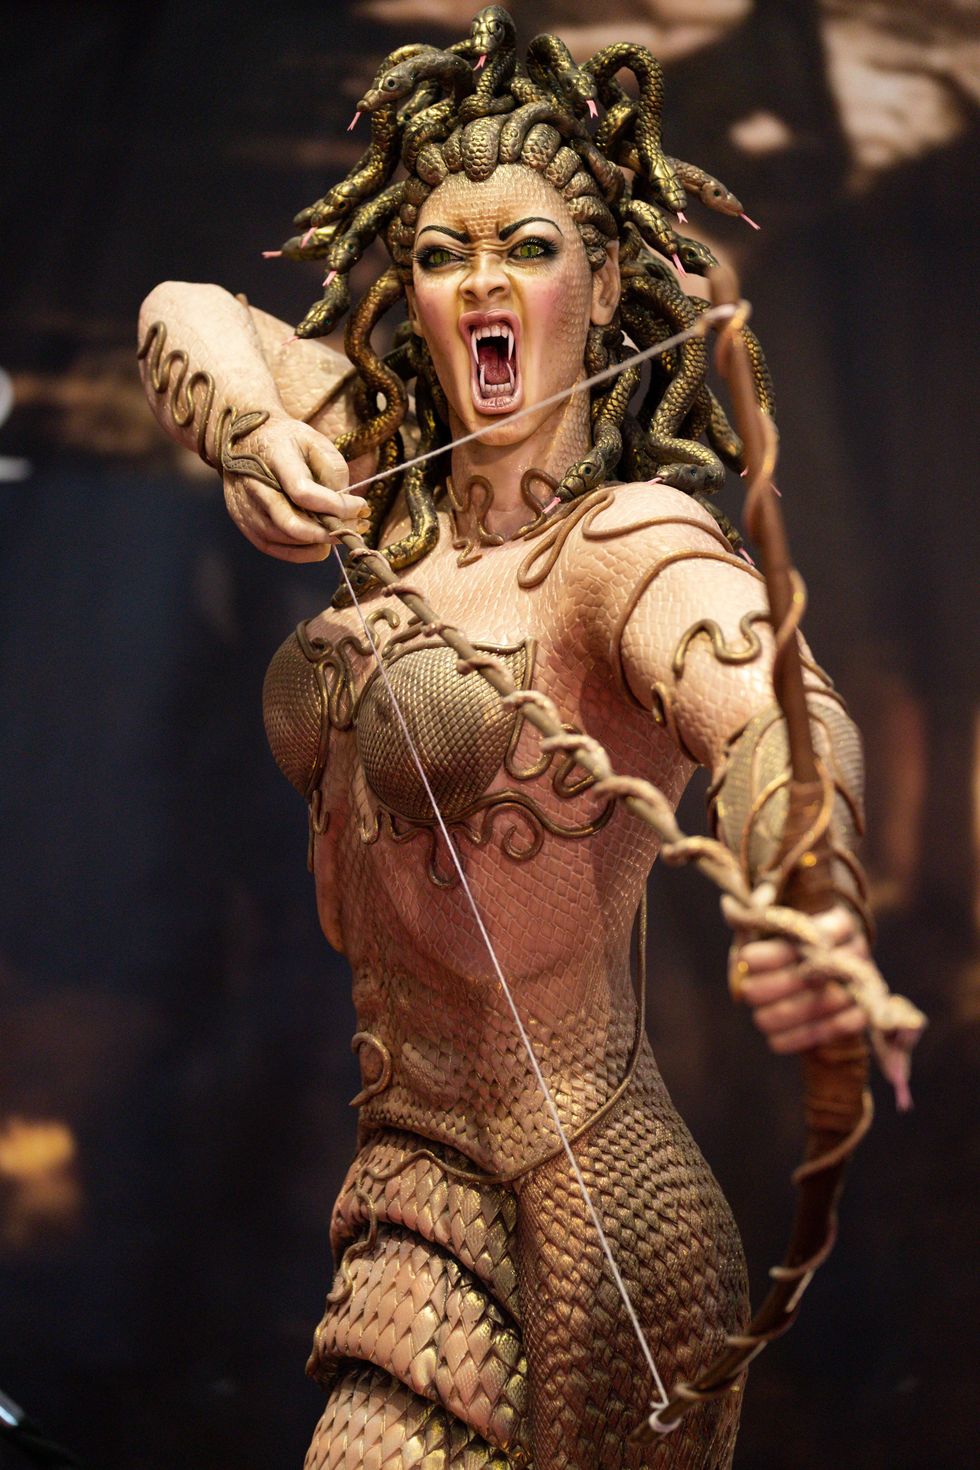 A life-sized cake of Medusa from Clash Of The Titans (Jacob King/PA)